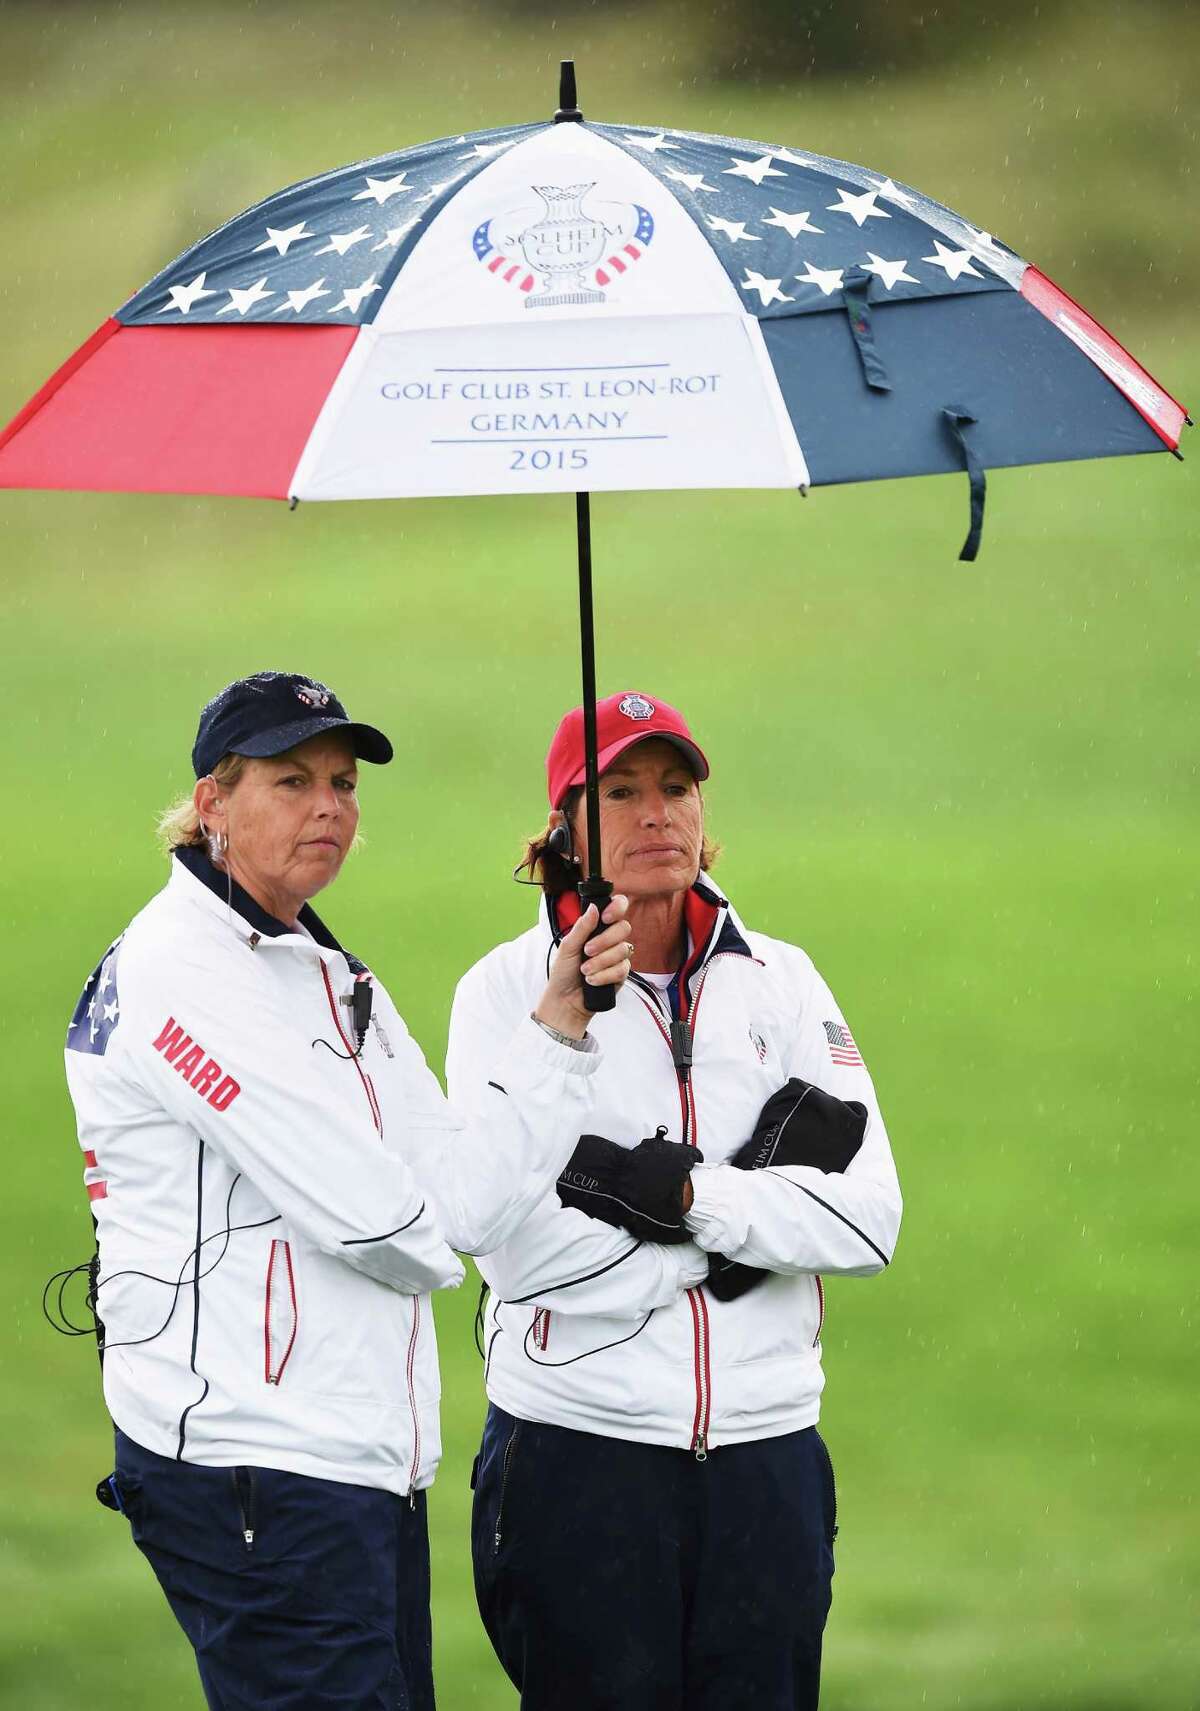 Team USA captain Juli Inkster looks on with Wendy Ward during practice prior to the start of the Solheim Cup at St Leon-Rot Golf Club on September 16, 2015 in St. Leon-Rot, Germany.